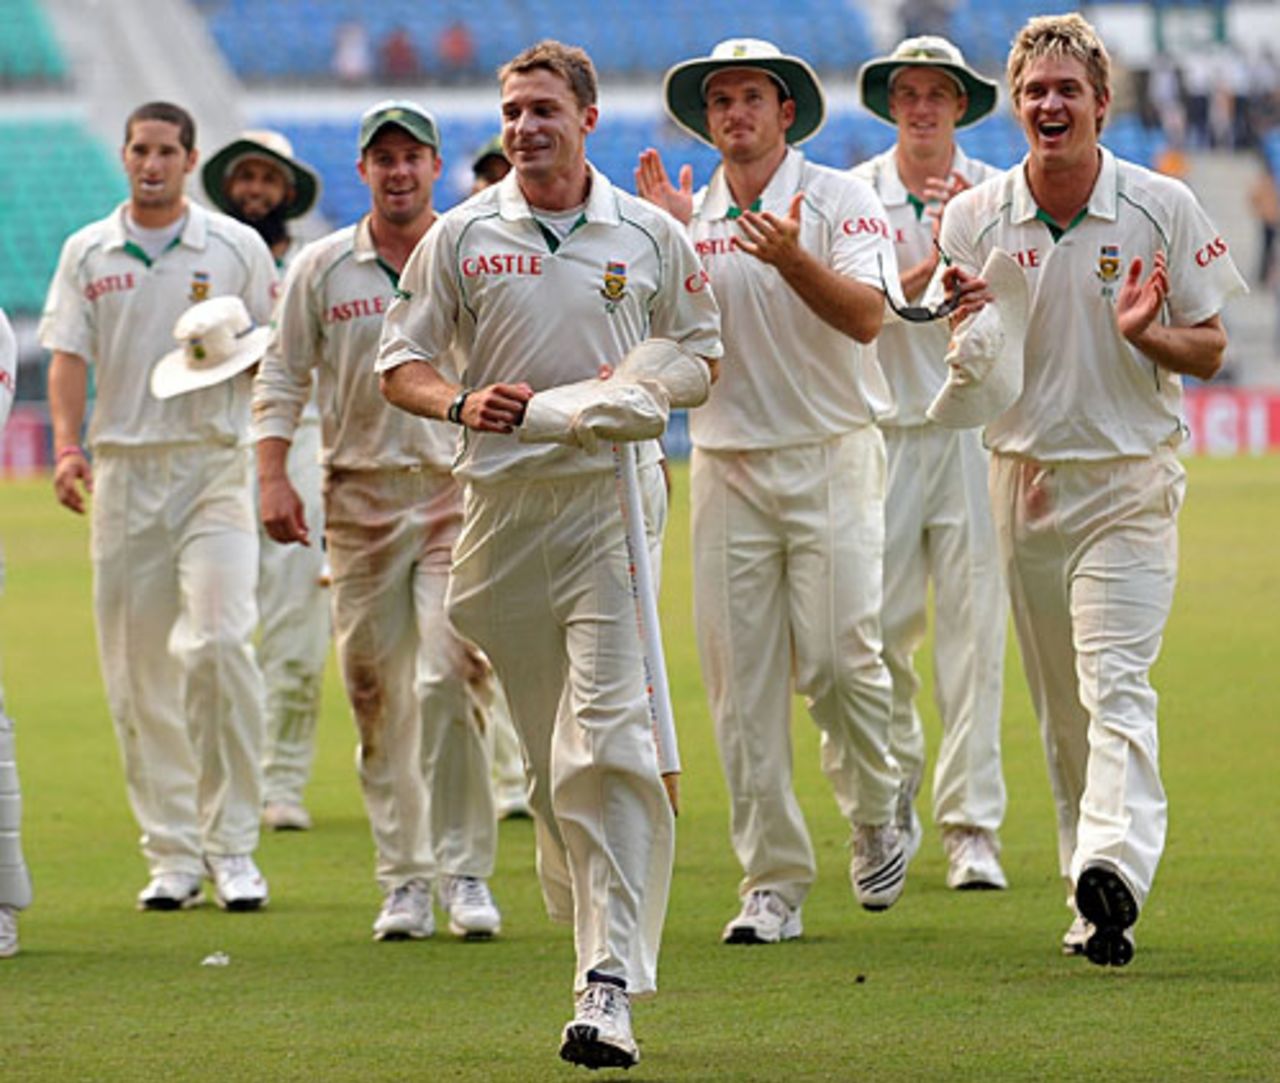 Dale Steyn leads the team off the field after the convincing win, India v South Africa, 1st Test, Nagpur, 4th day, February 9, 2010